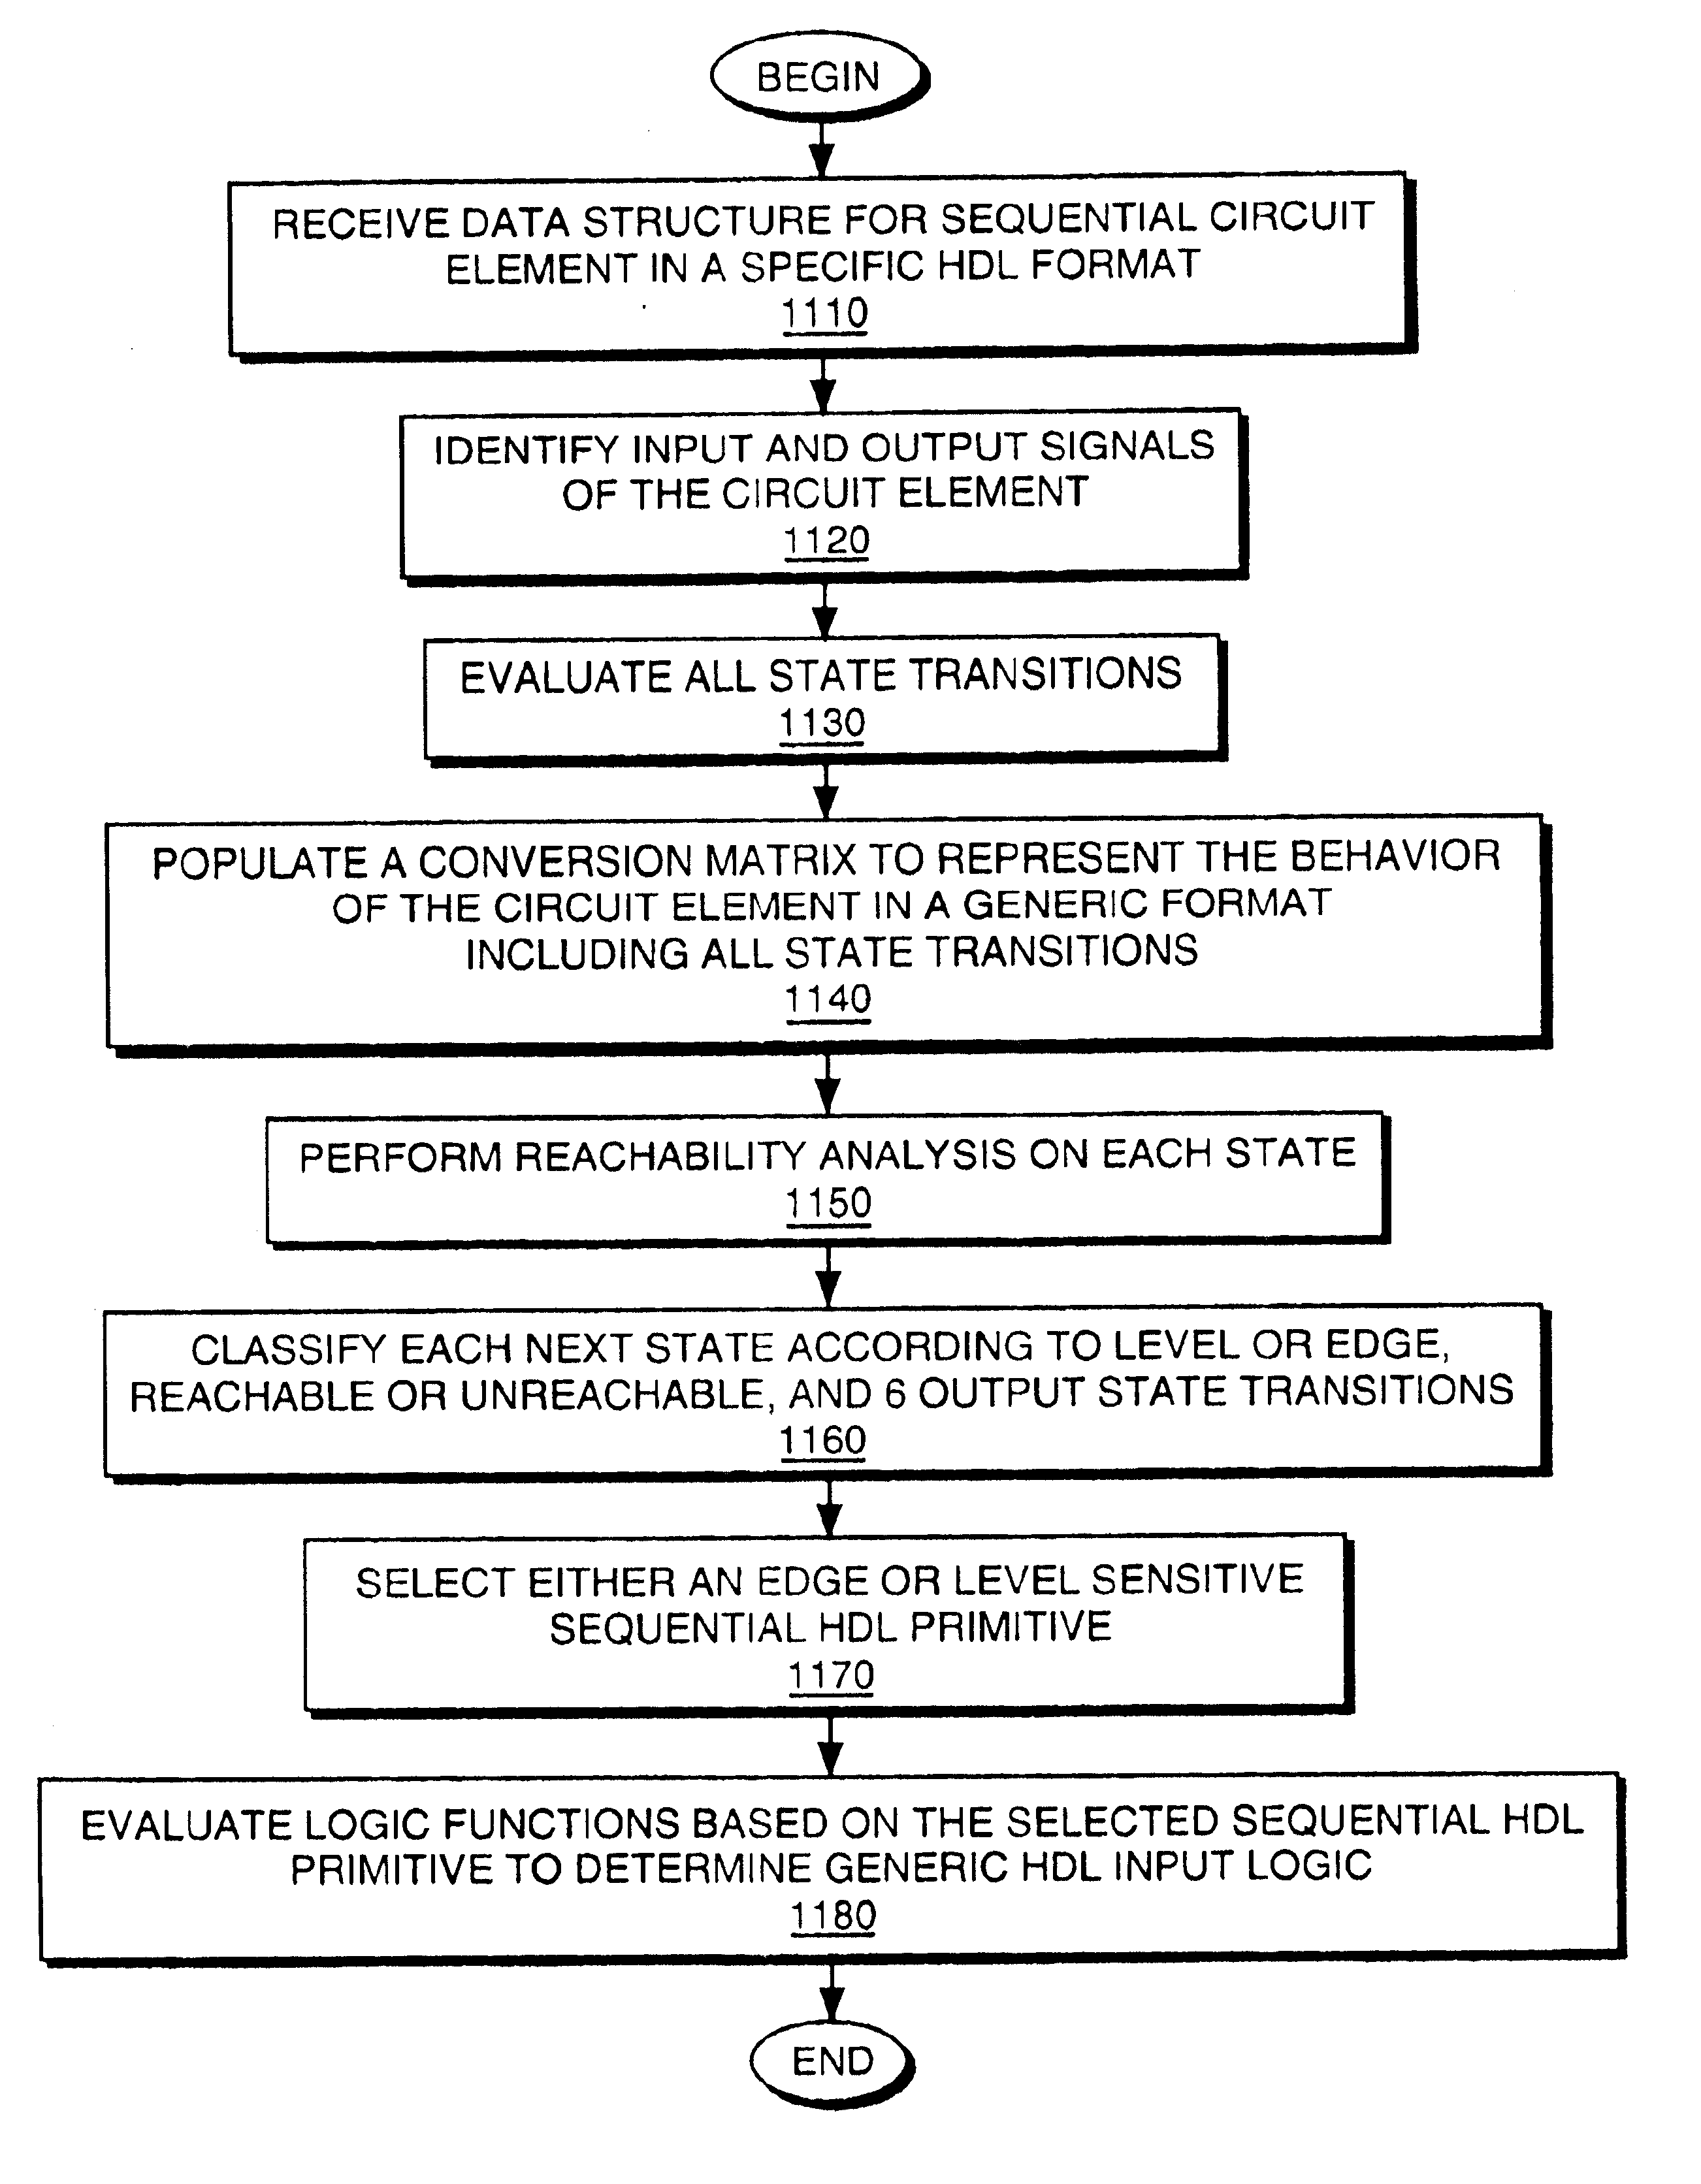 Conversion of an HDL sequential truth table to generic HDL elements